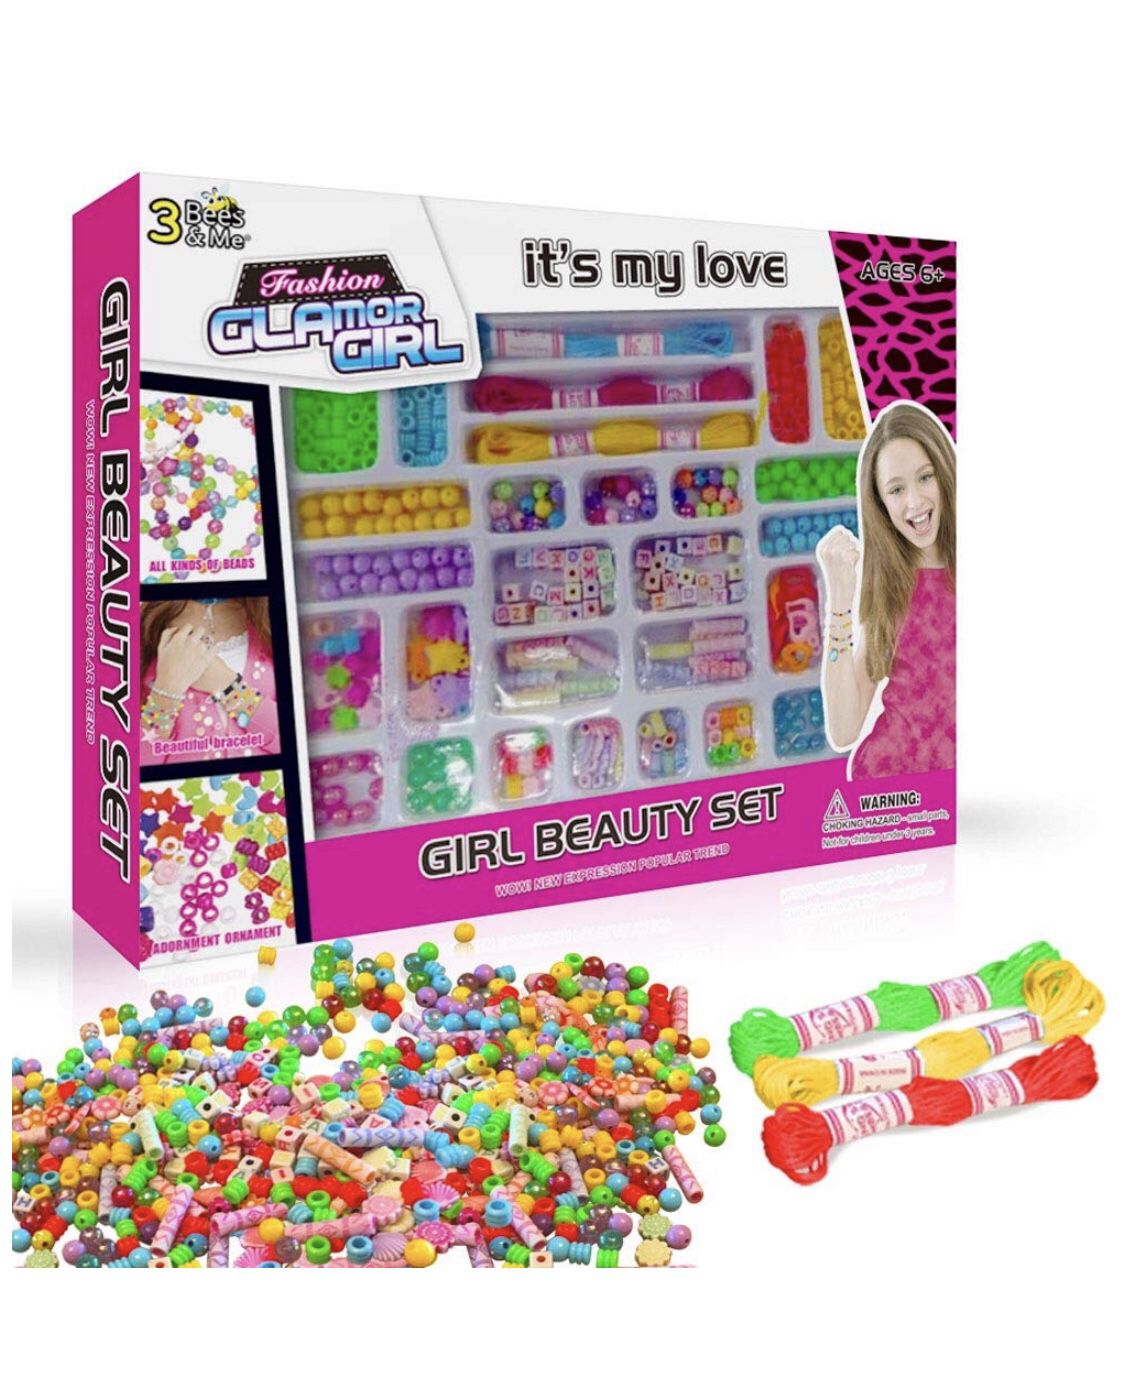 Complete Bracelet Making Kit for Girls - Fun DIY String Charms and Bead Bracelet & Jewelry Making Kit for Kids 6 7 8 9 Years Old